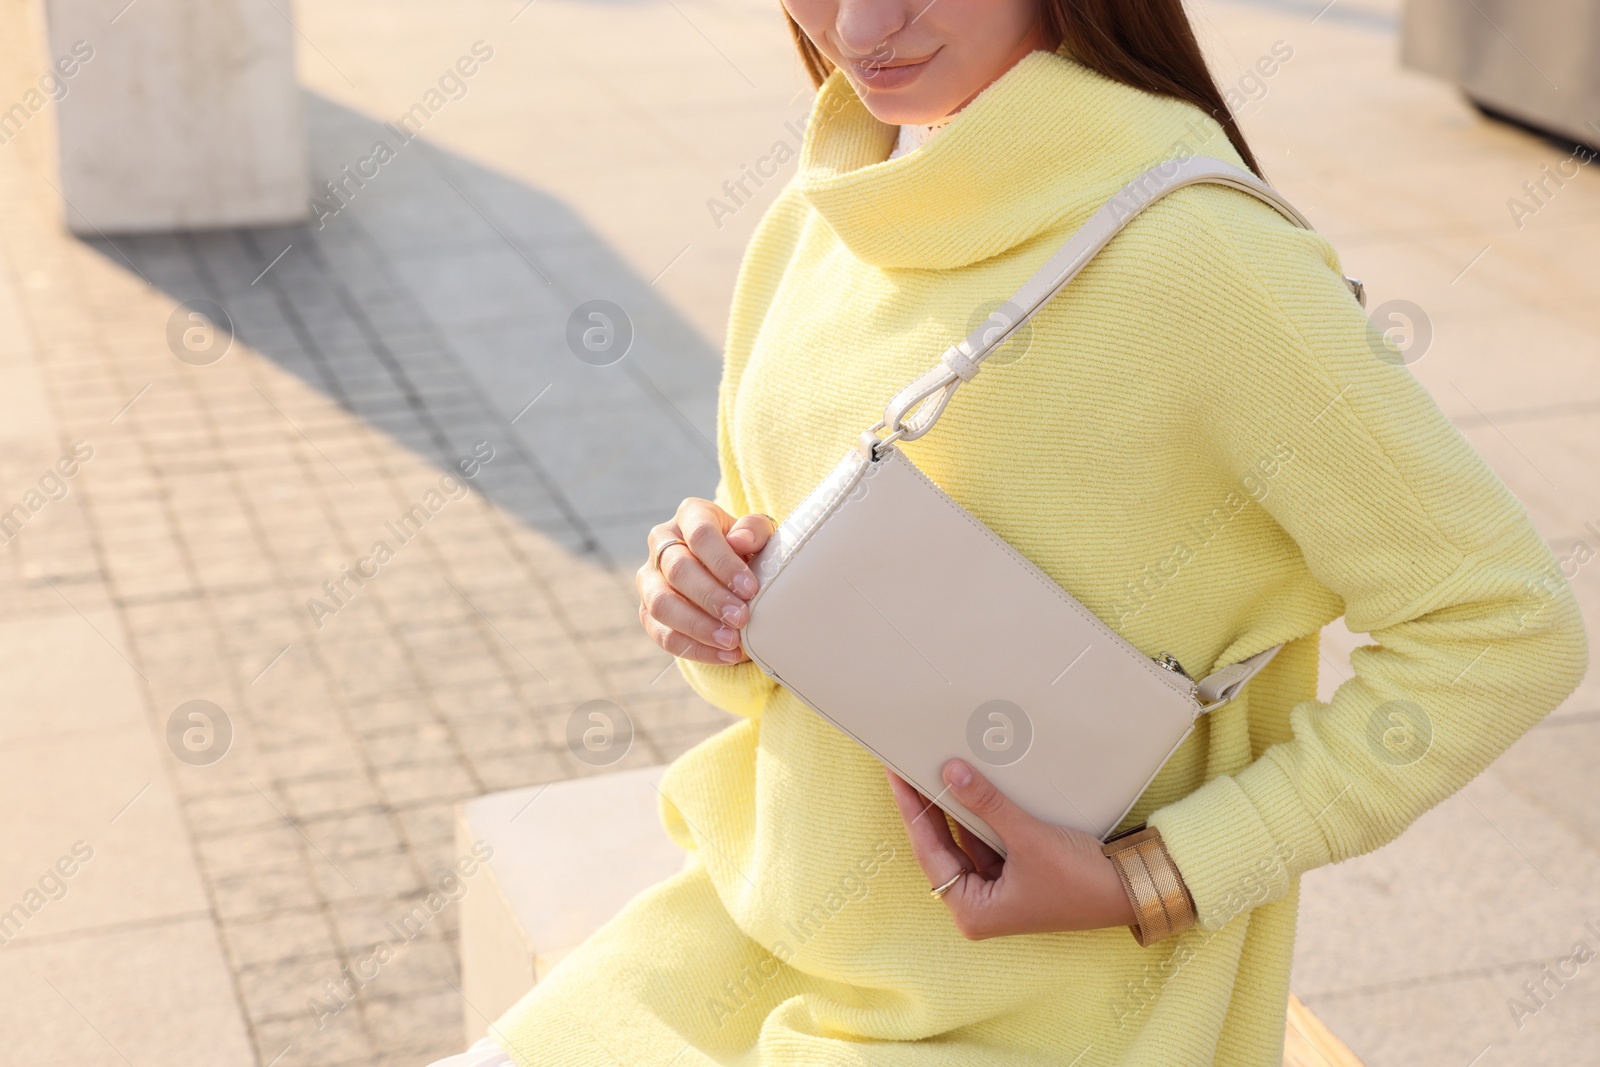 Photo of Fashionable young woman with stylish bag on bench outdoors, closeup